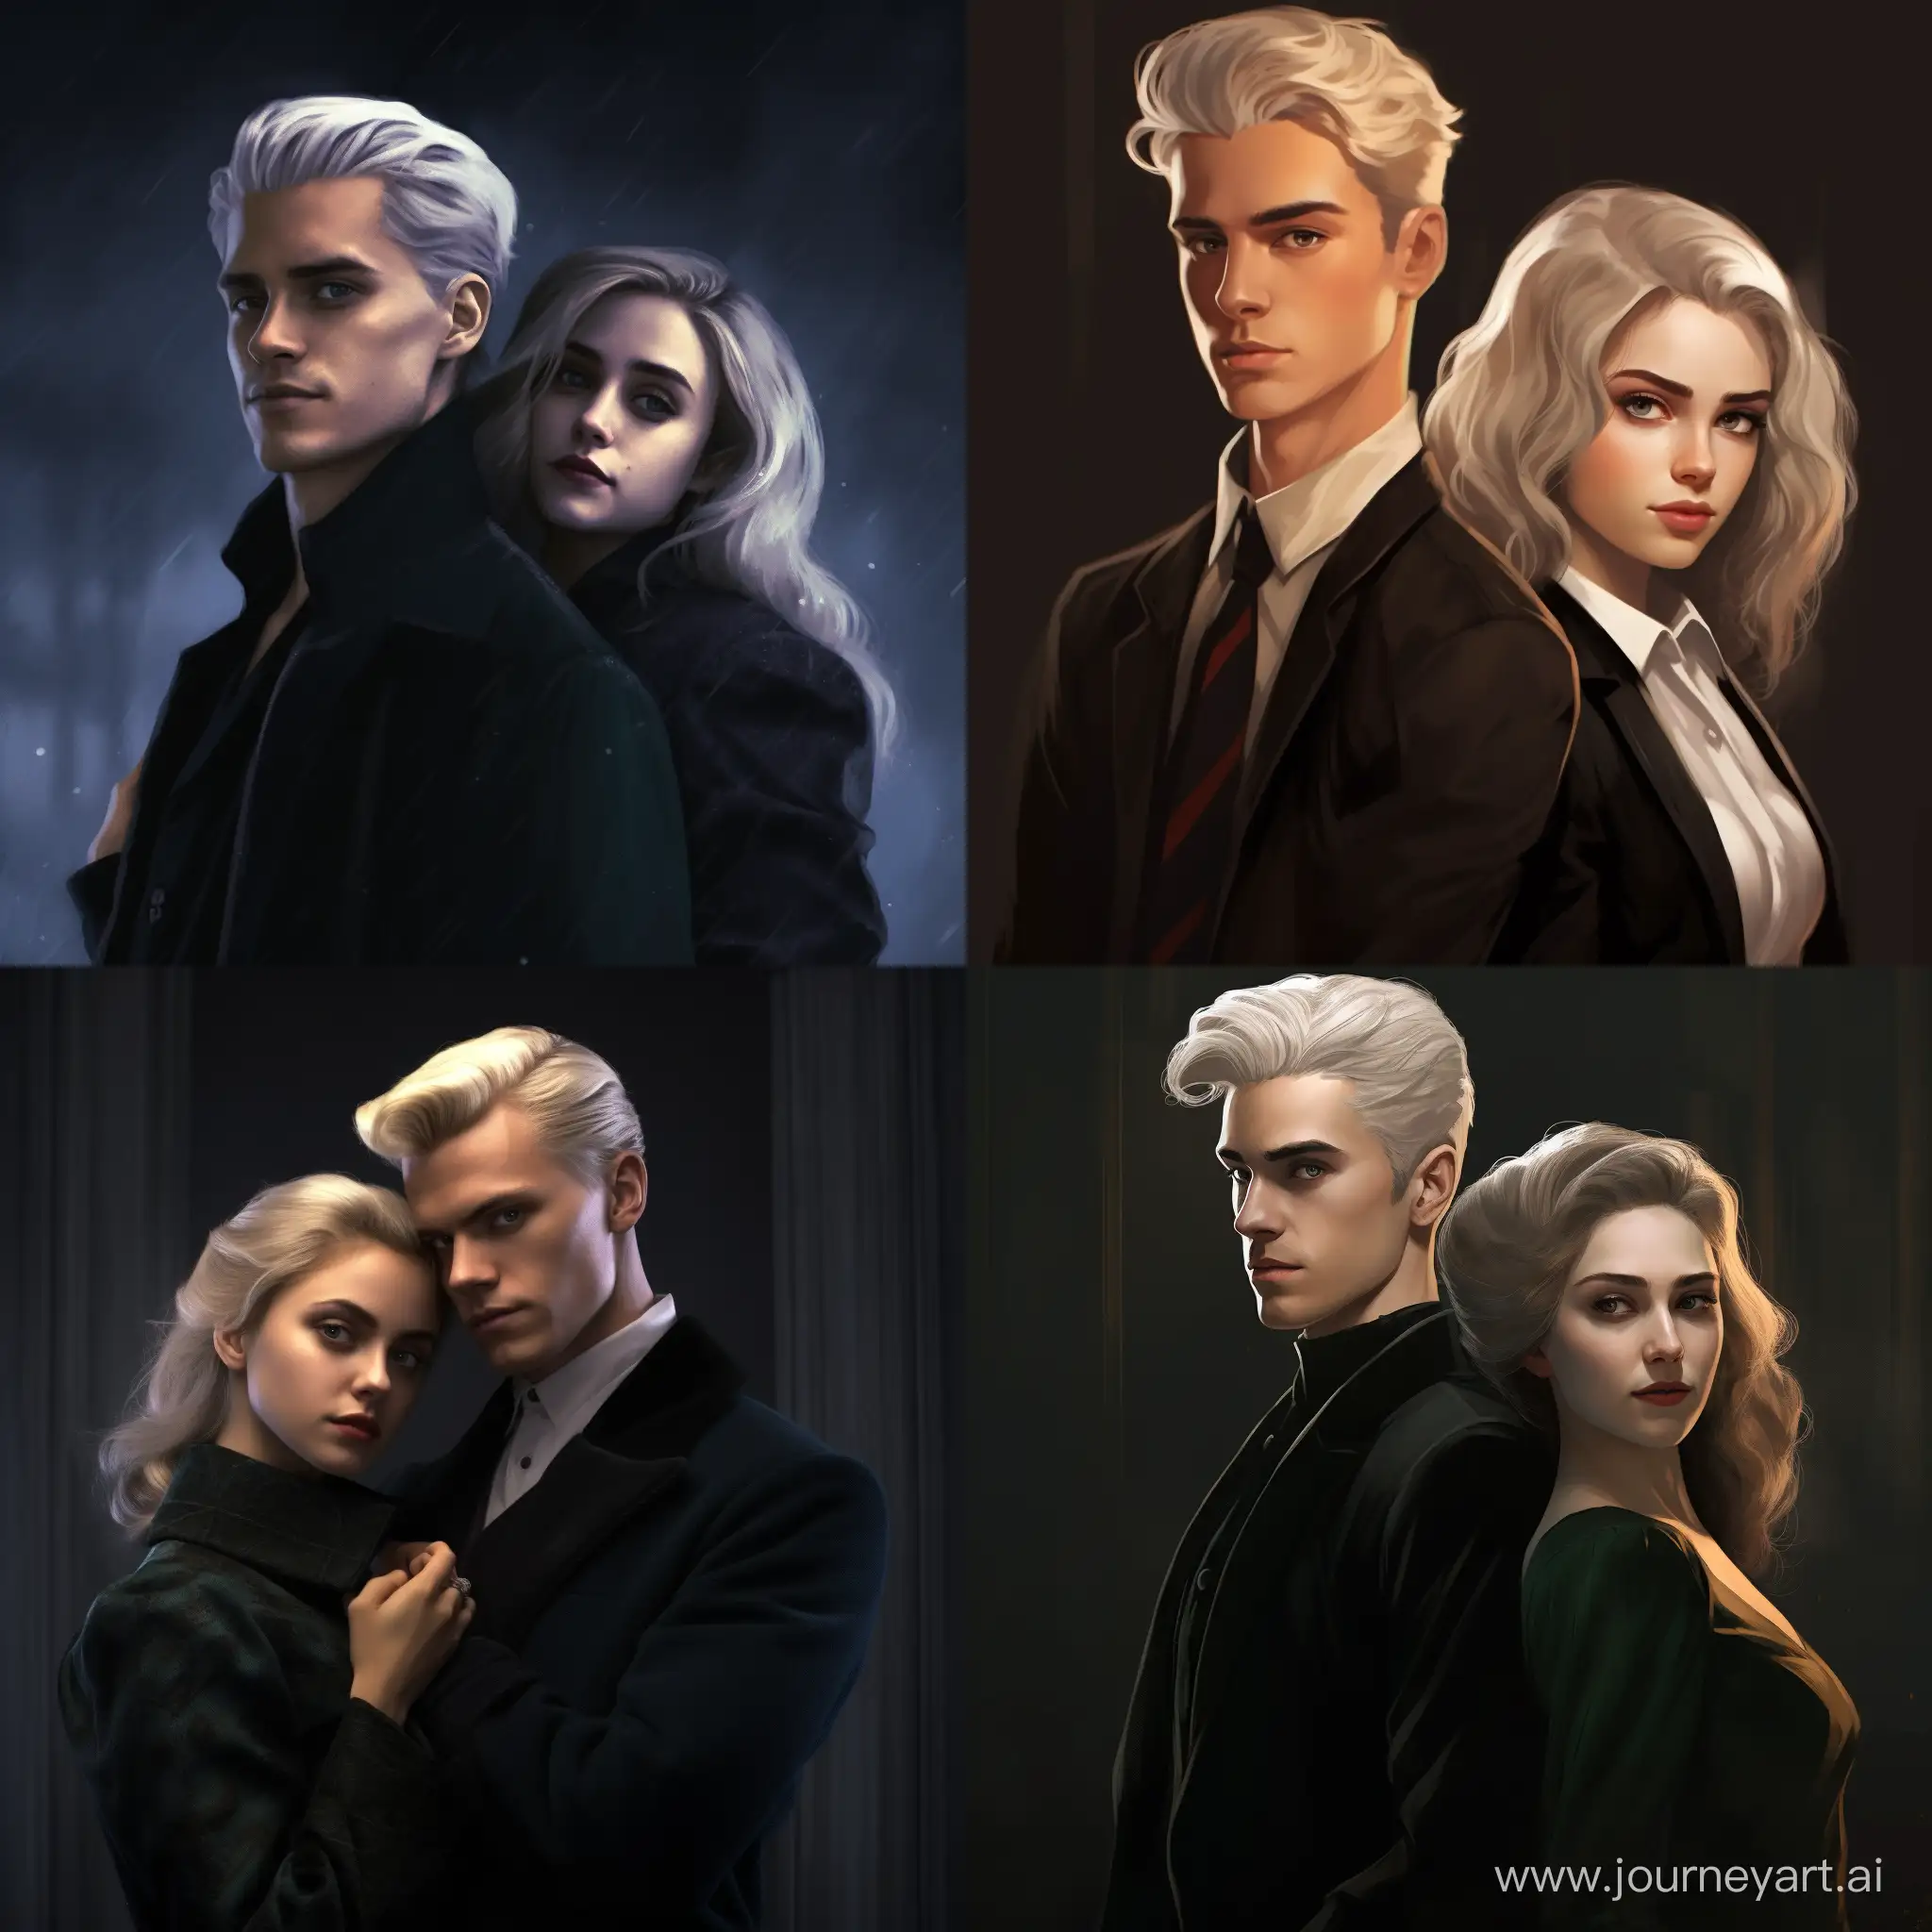 Draco-Malfoy-and-Hermione-Granger-Portrait-in-a-11-Aspect-Ratio-Magical-Encounter